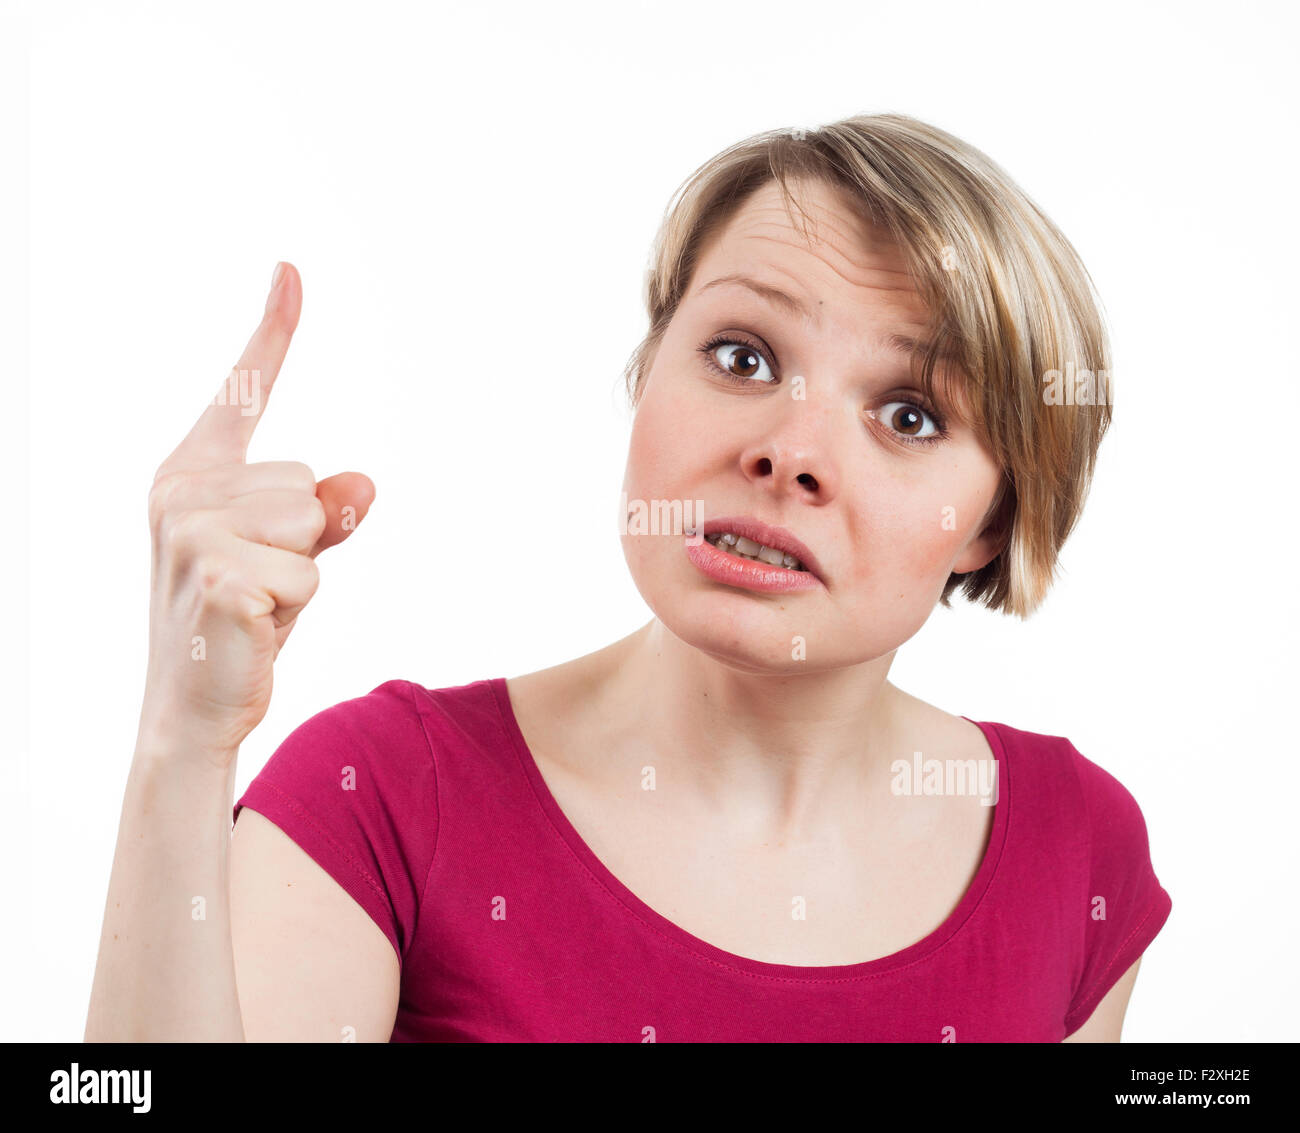 Close up view of a young woman scolding somebody, isolated on white Stock Photo